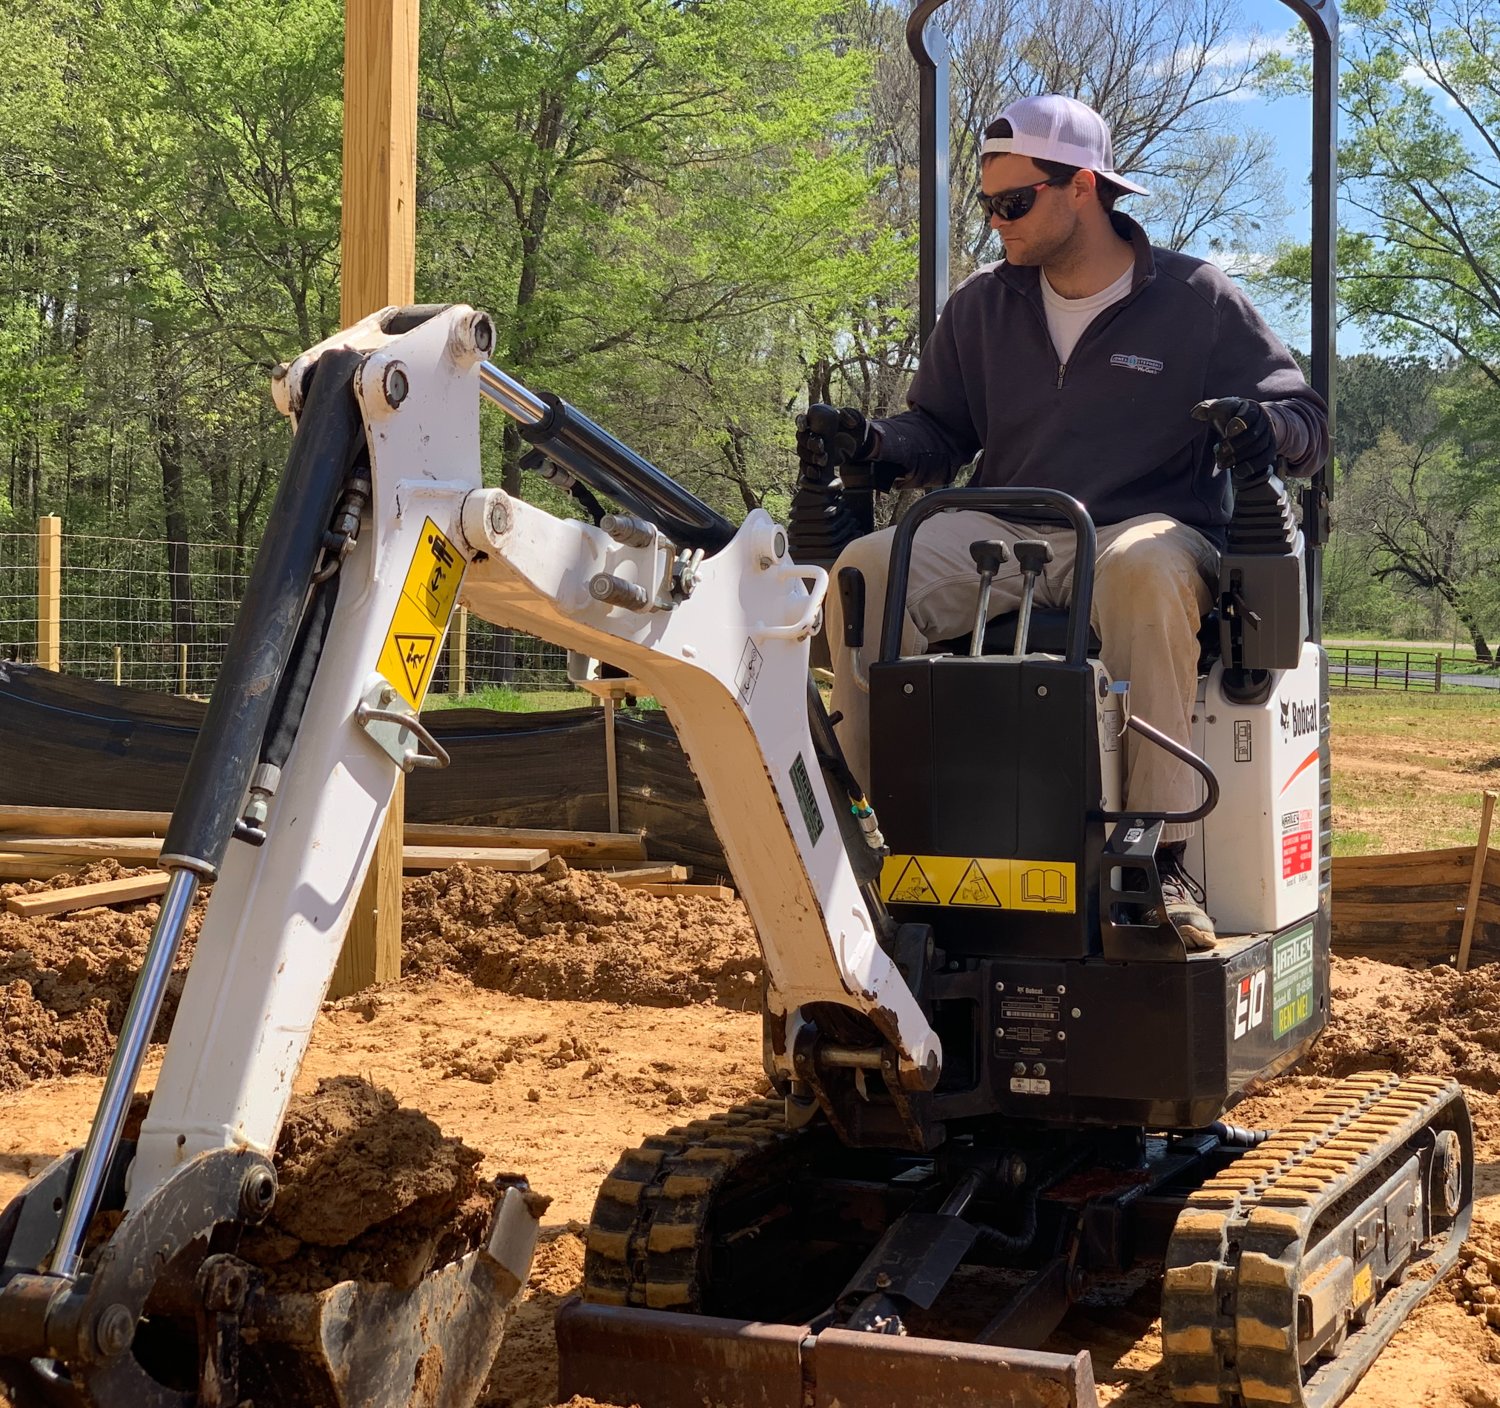 Crockett Ford drives an excavator at a new home site in Canton.